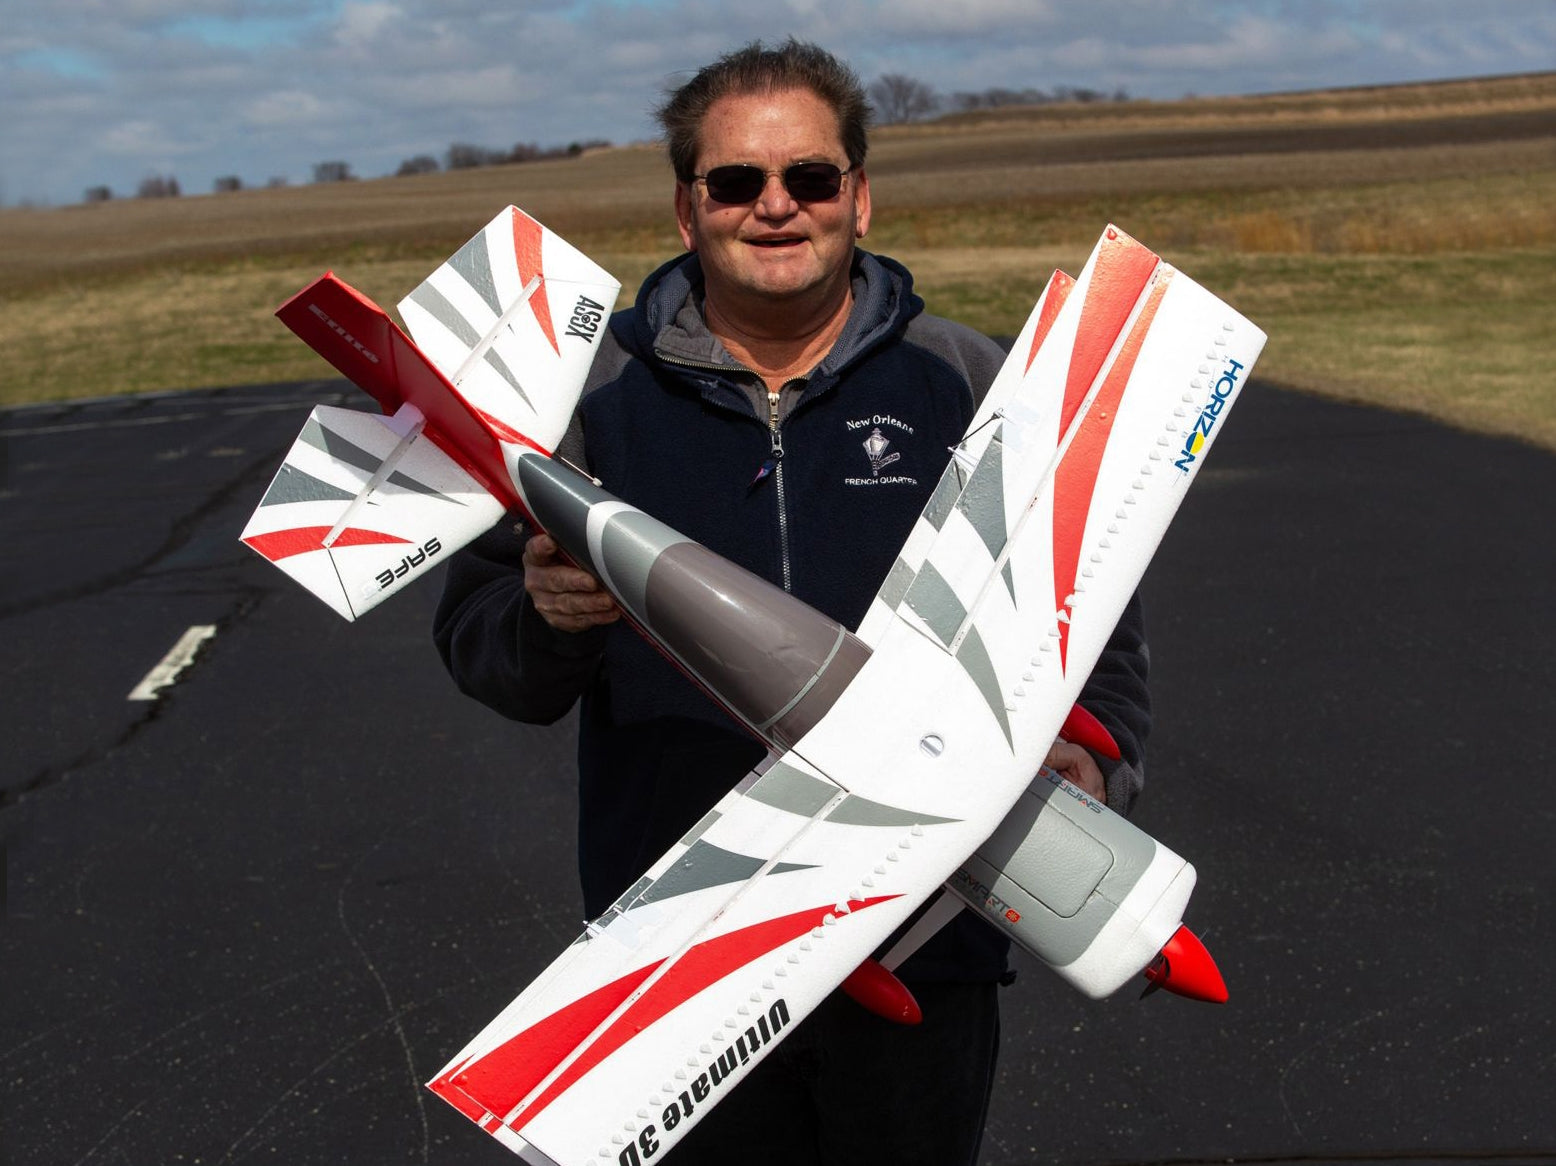 E-Flite Ultimate 3D 950mm Smart BNF Basic with AS3X & SAFE EFL16550